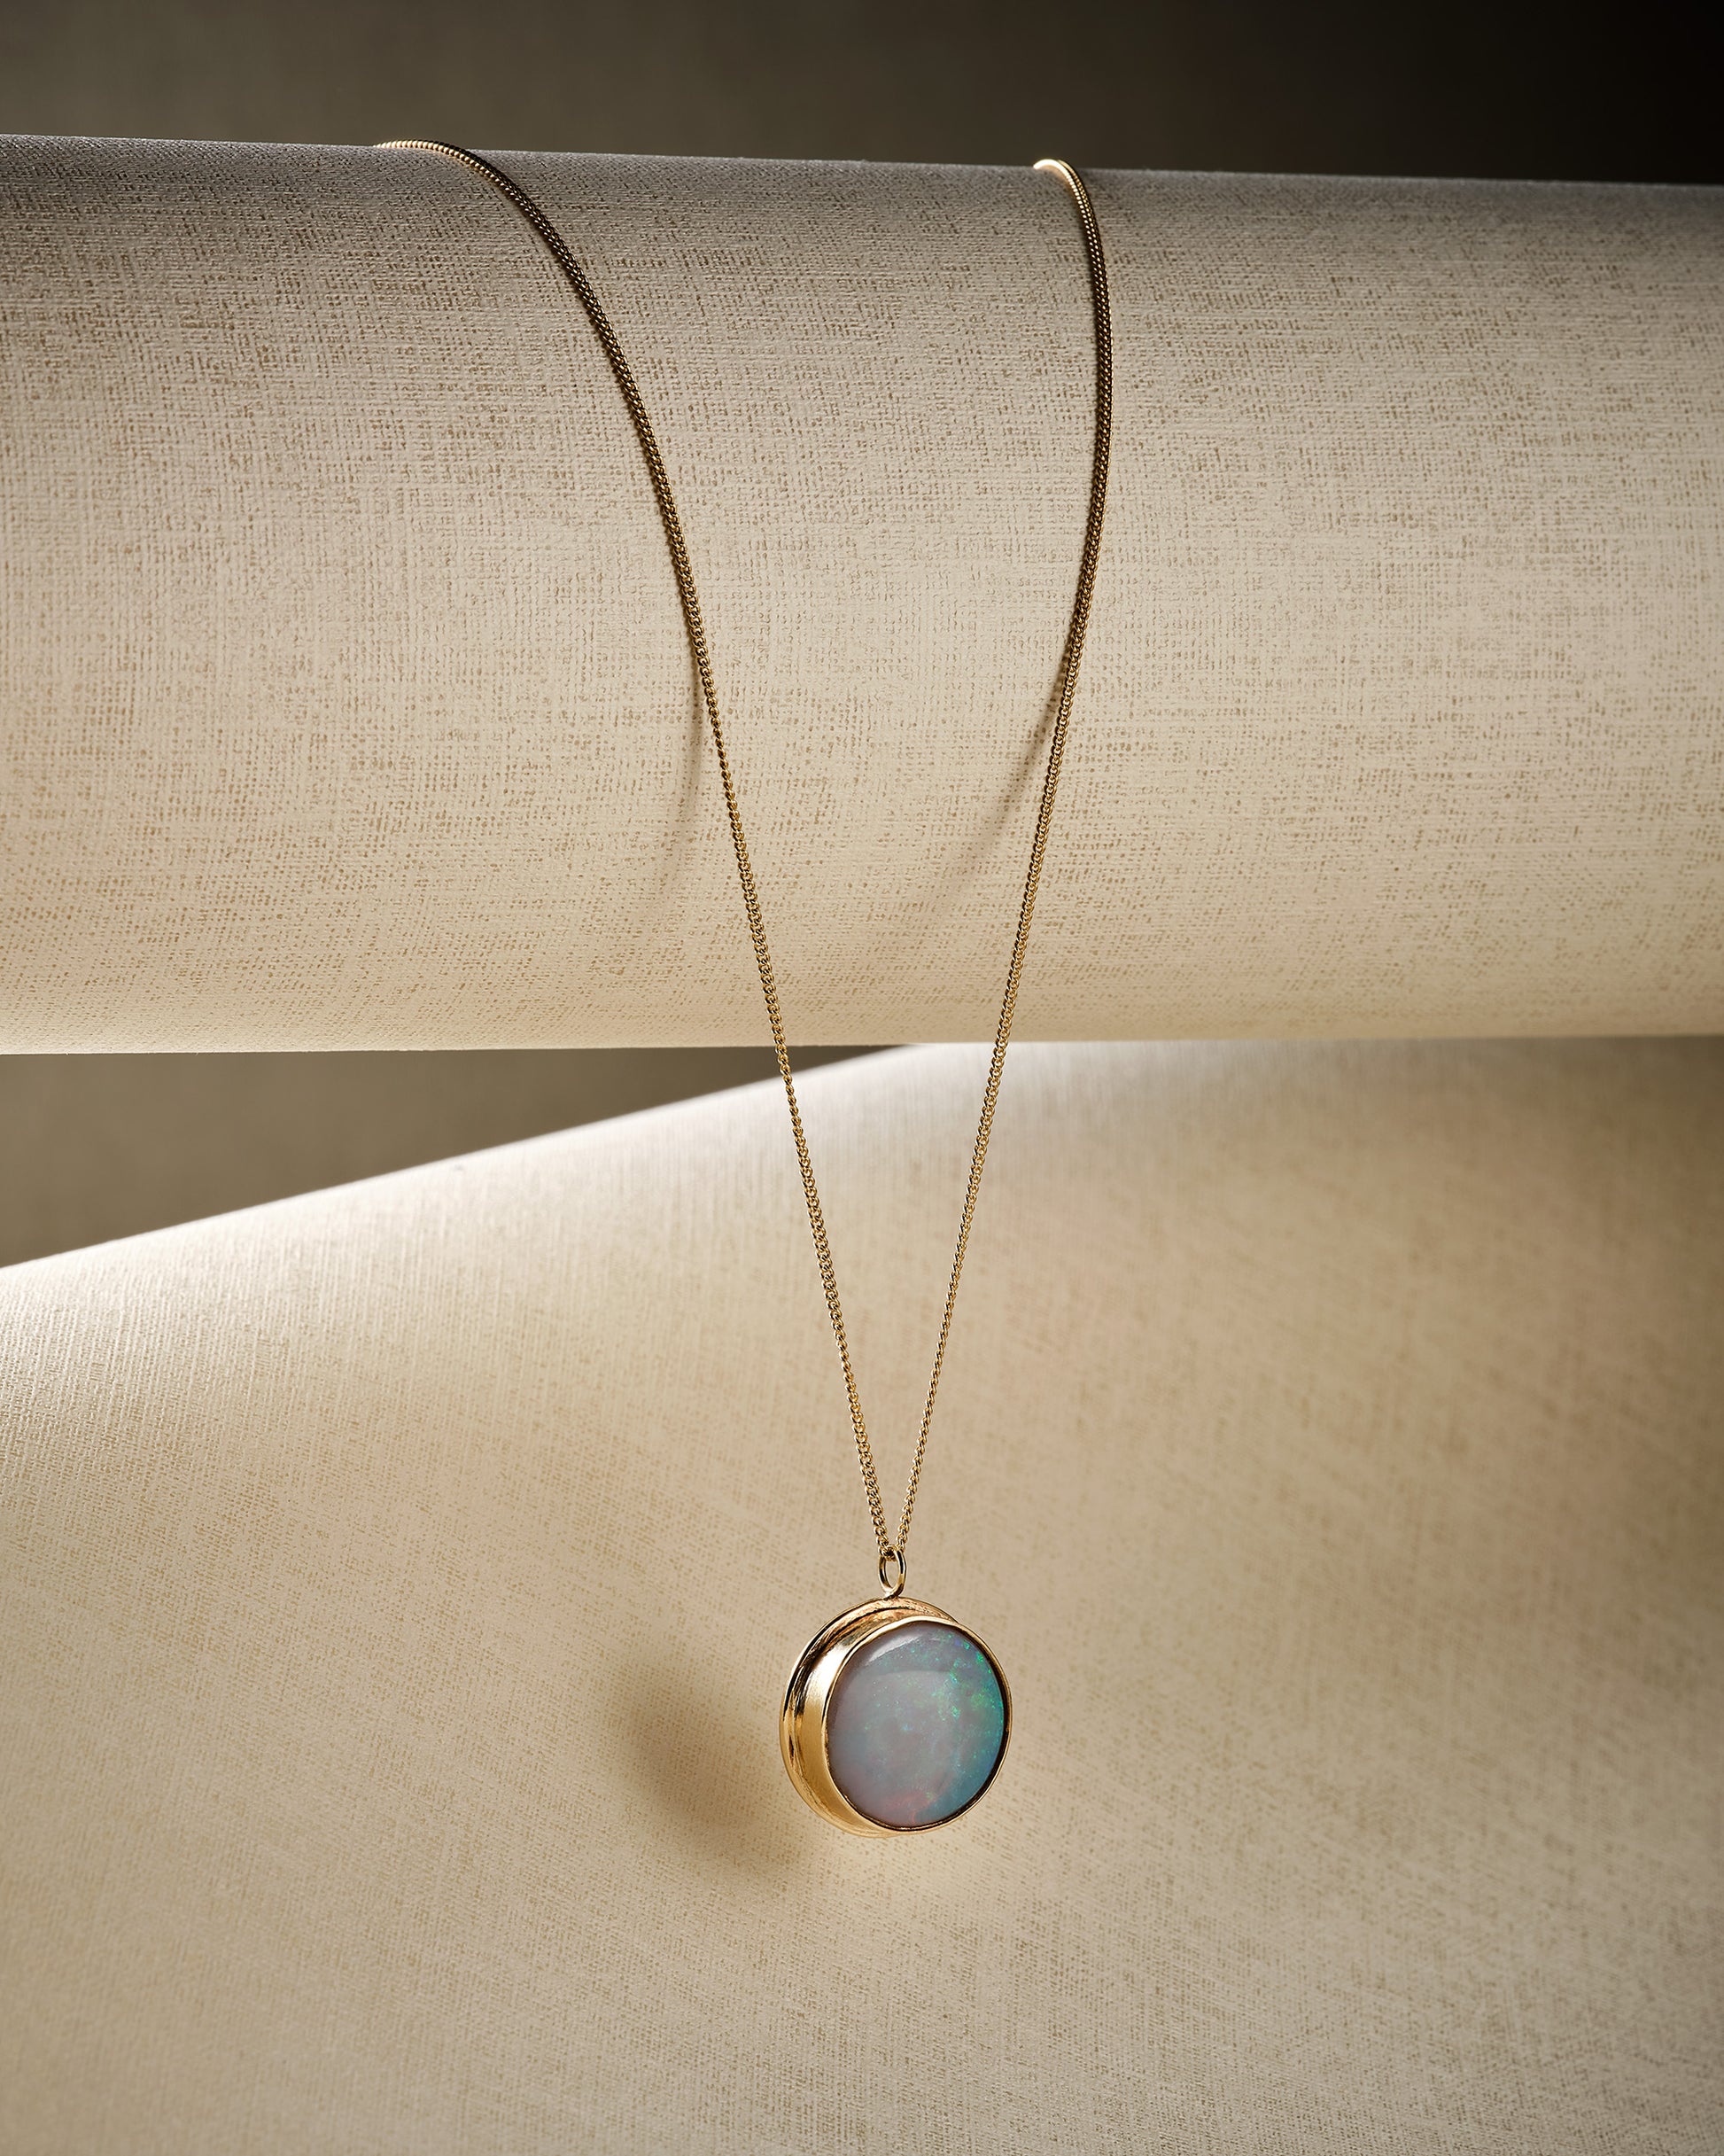 white opal and solid gold pendant necklace on beige background